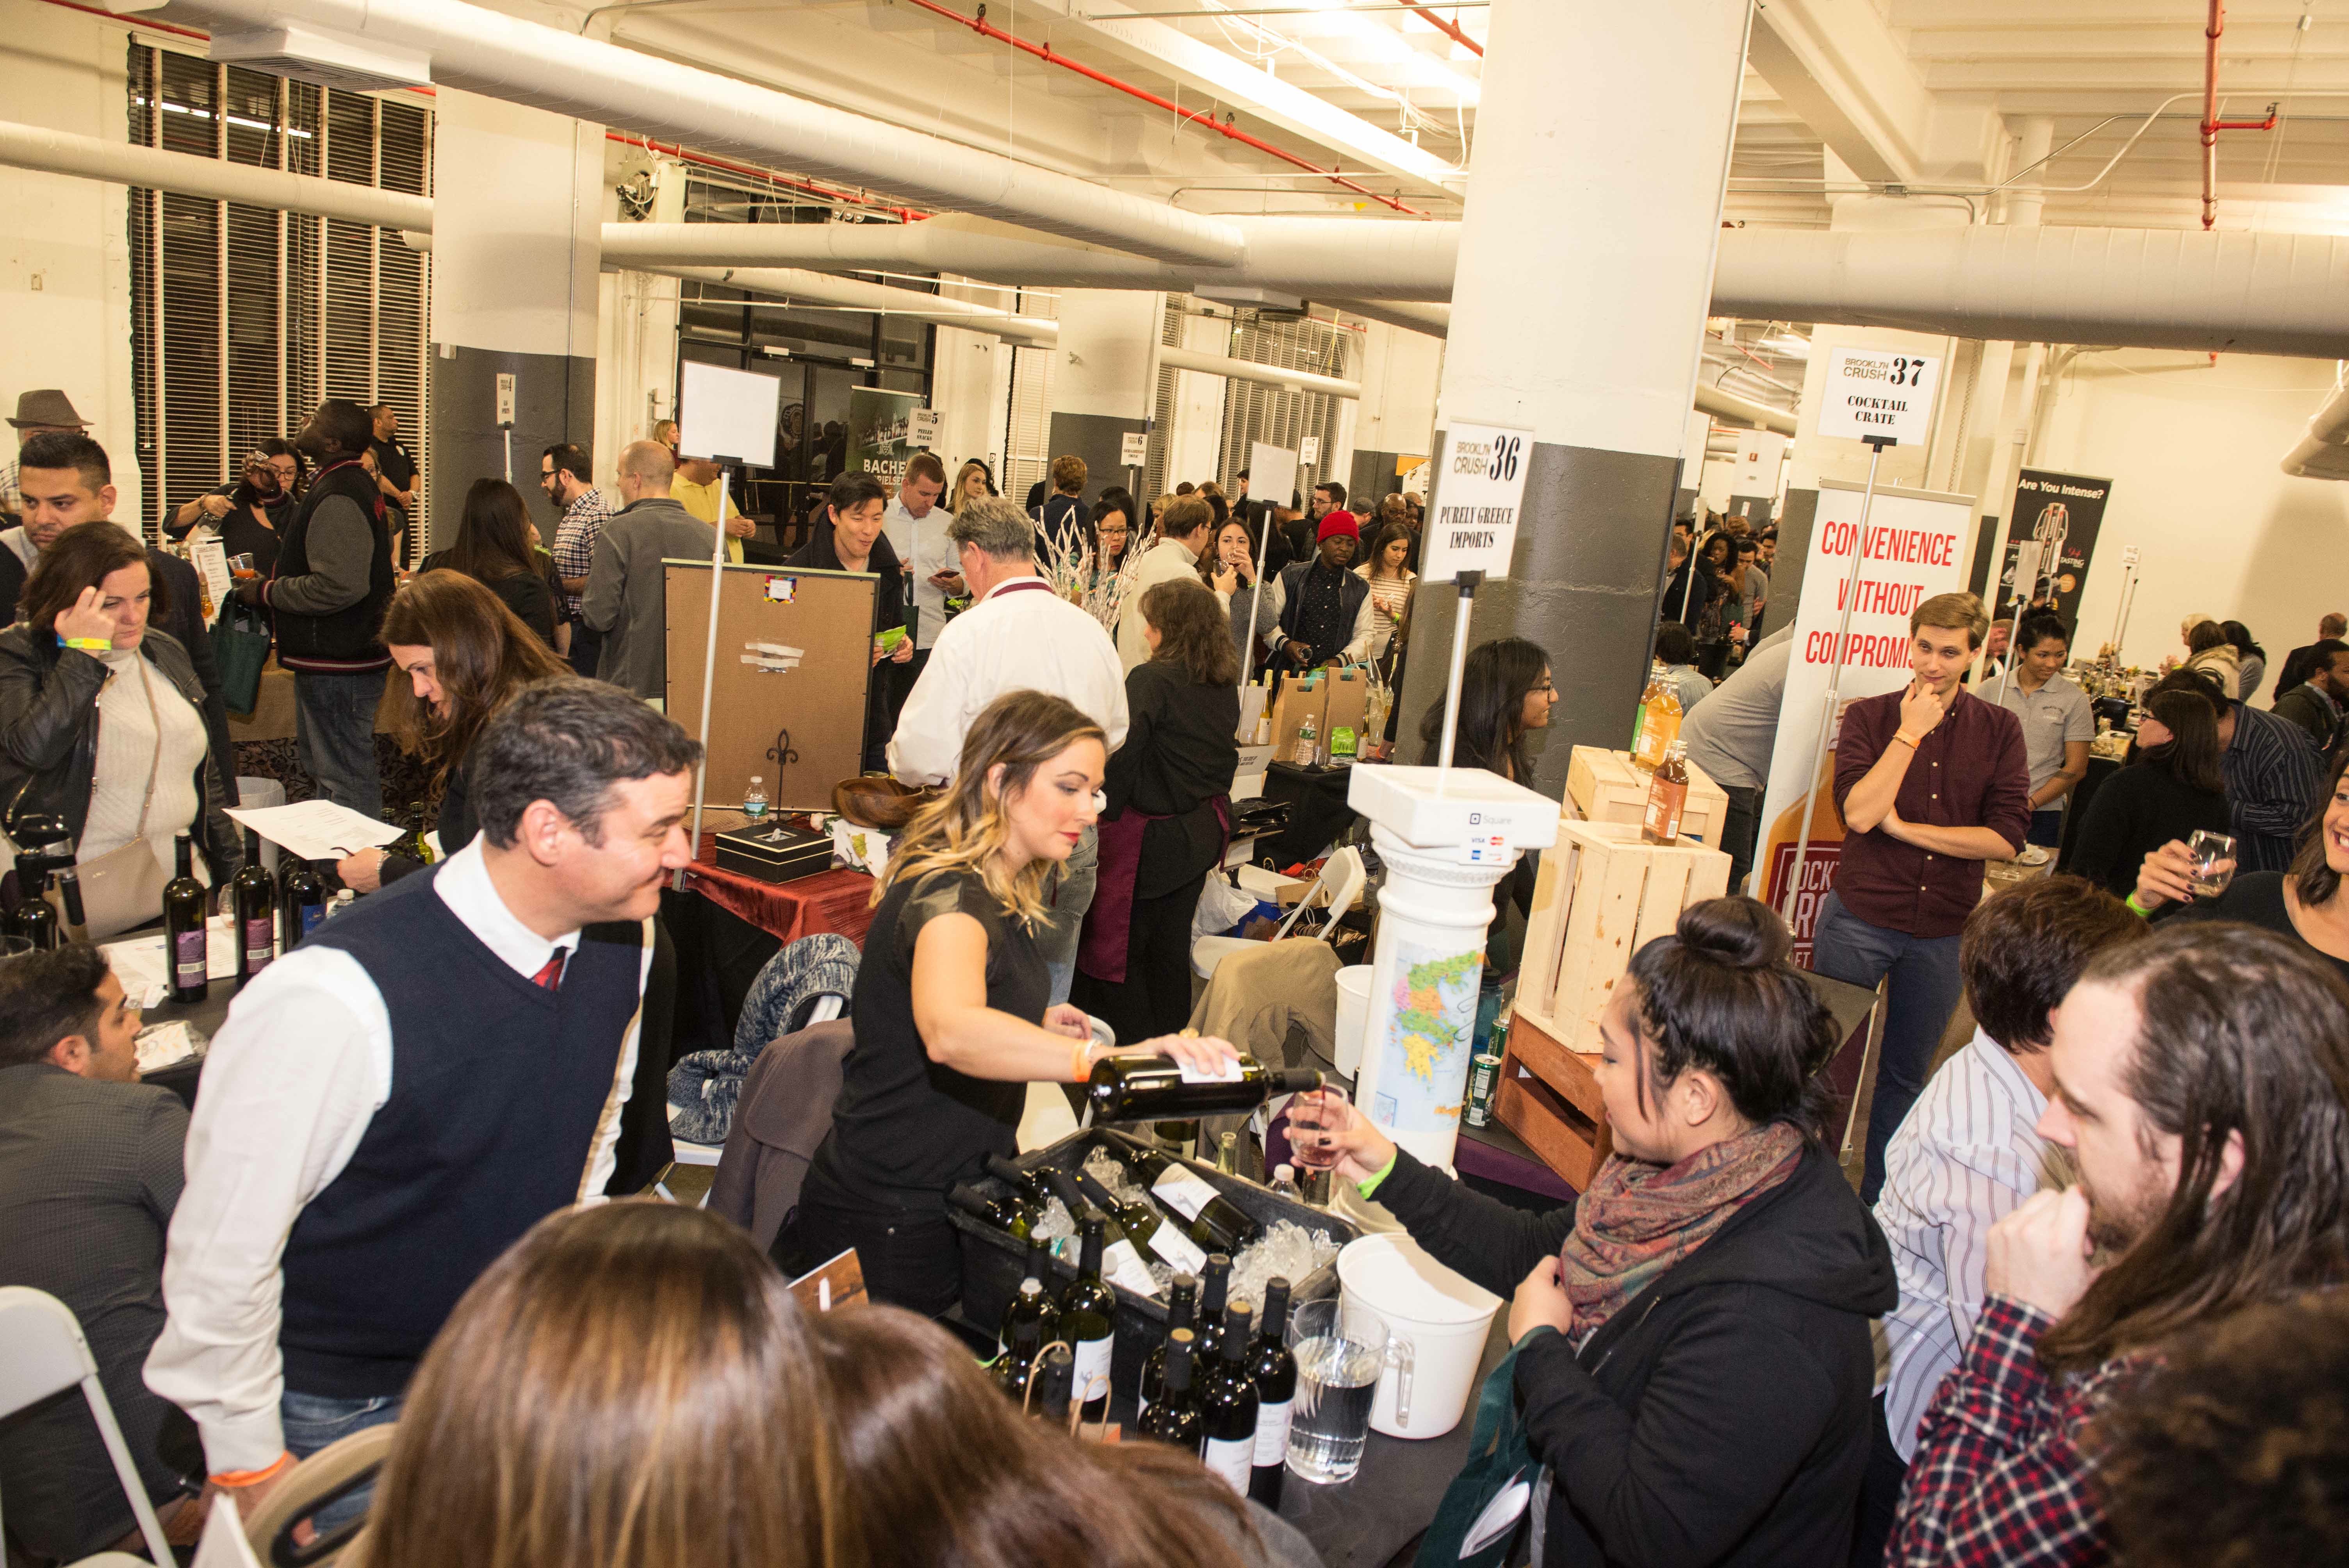 Brooklyn Crush returns to Industry City on May 13 featuring 175+ wines and diverse artisanal foods. Tickets are on sale now at NewYorkWineEvents.com